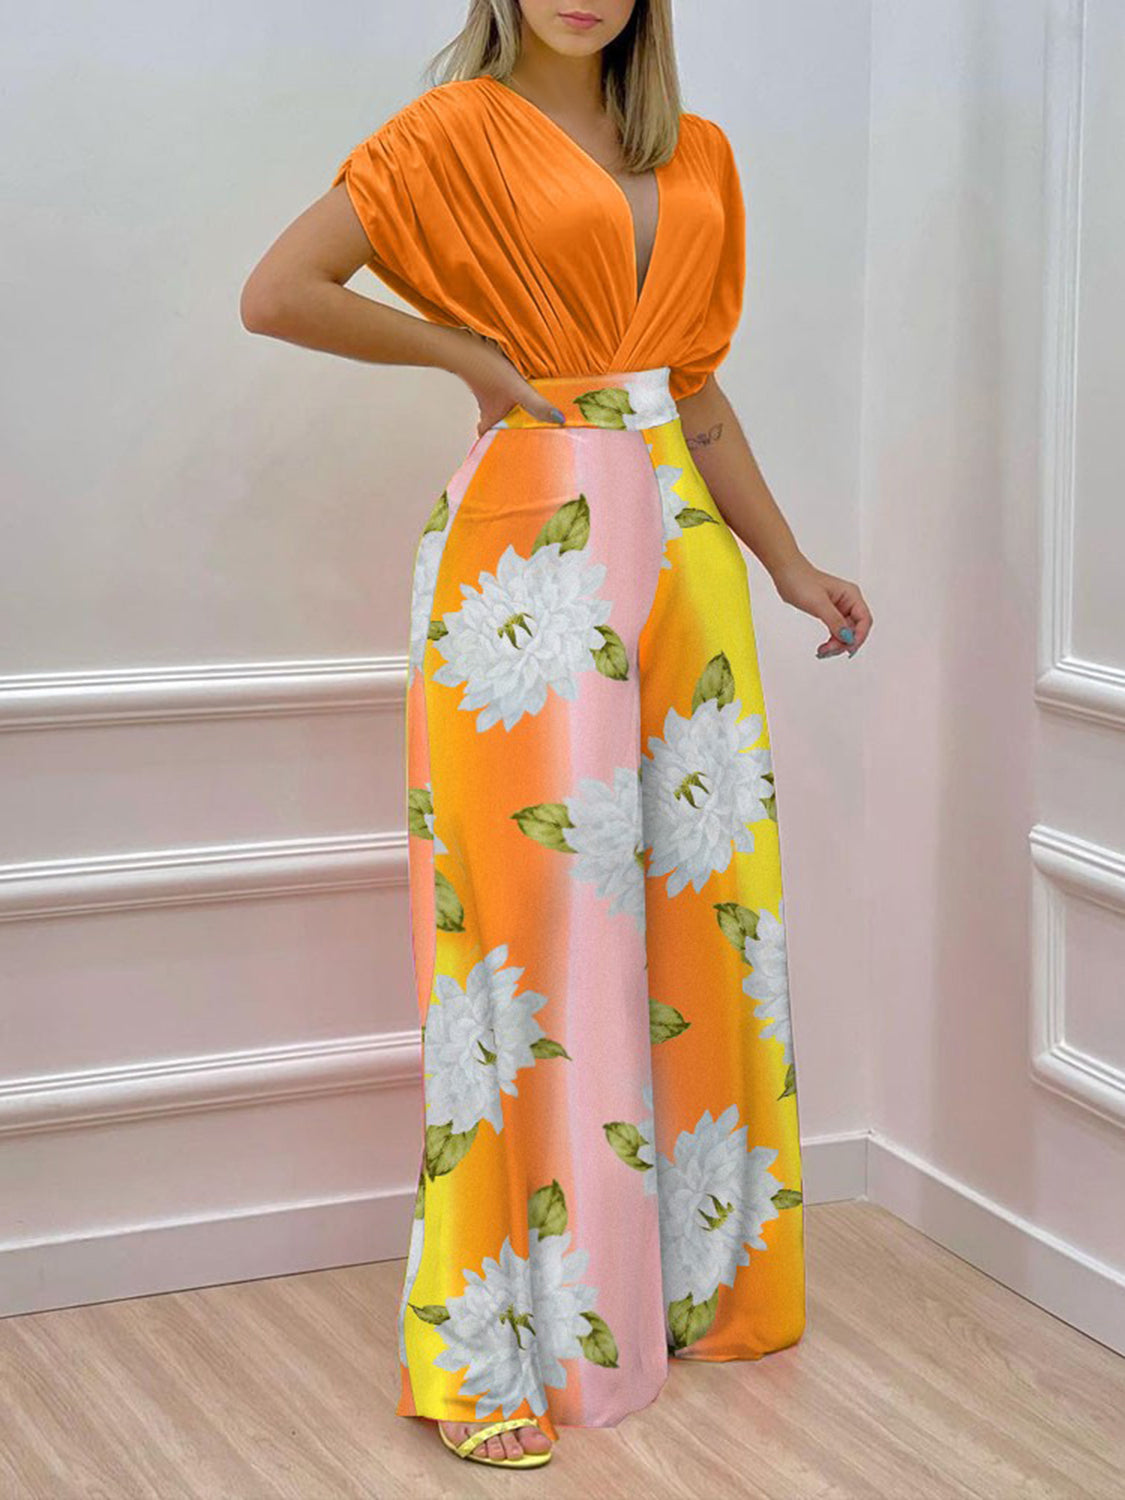 Turn Heads with the Printed Surplice Top and Wide Leg Pants Set